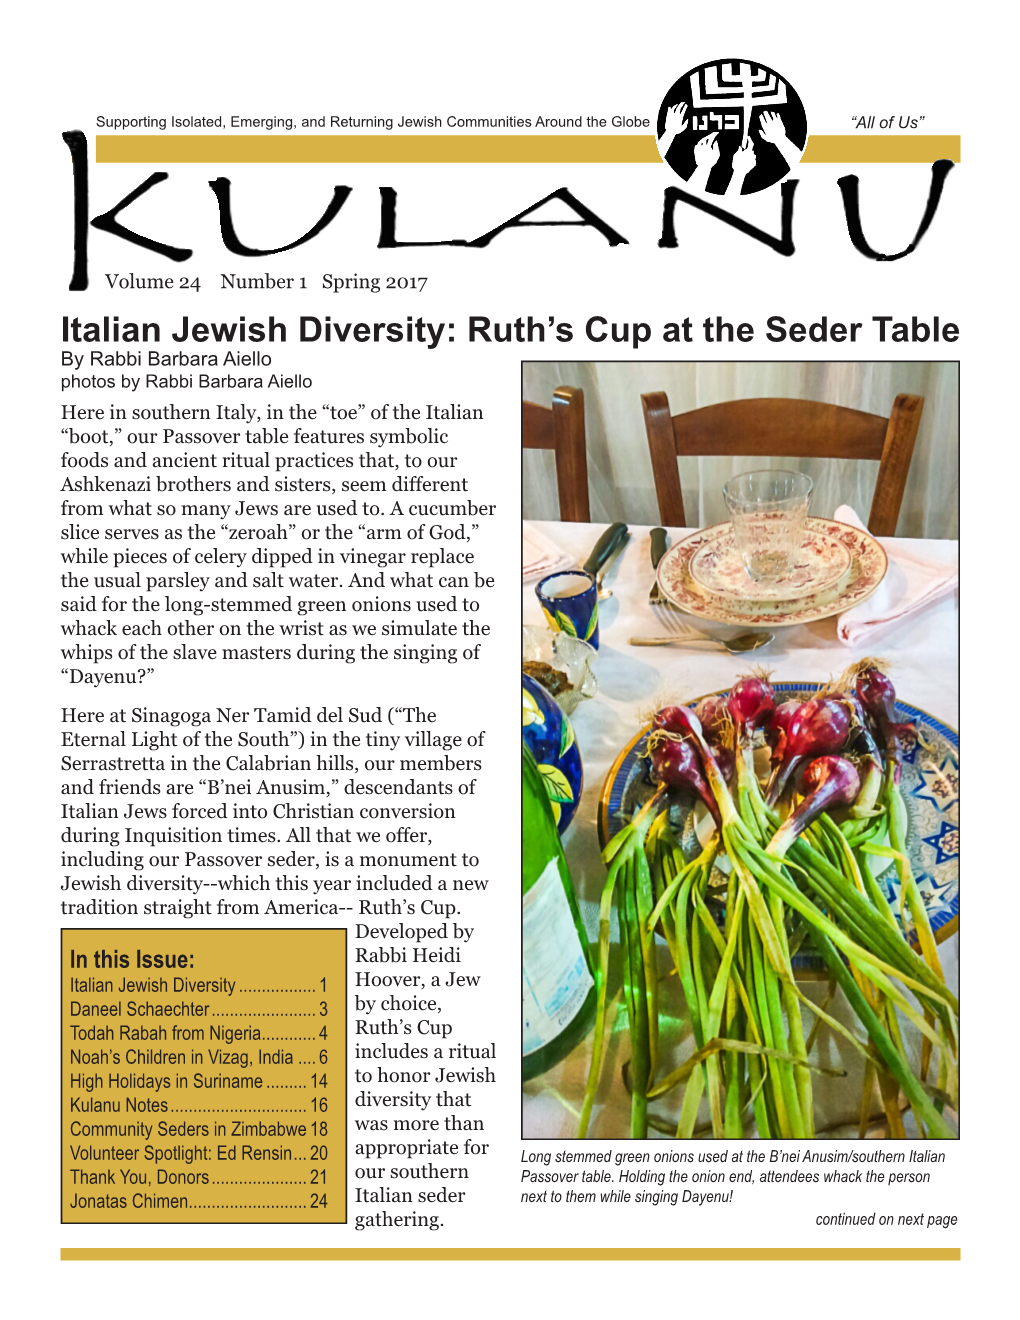 Italian Jewish Diversity: Ruth's Cup at the Seder Table